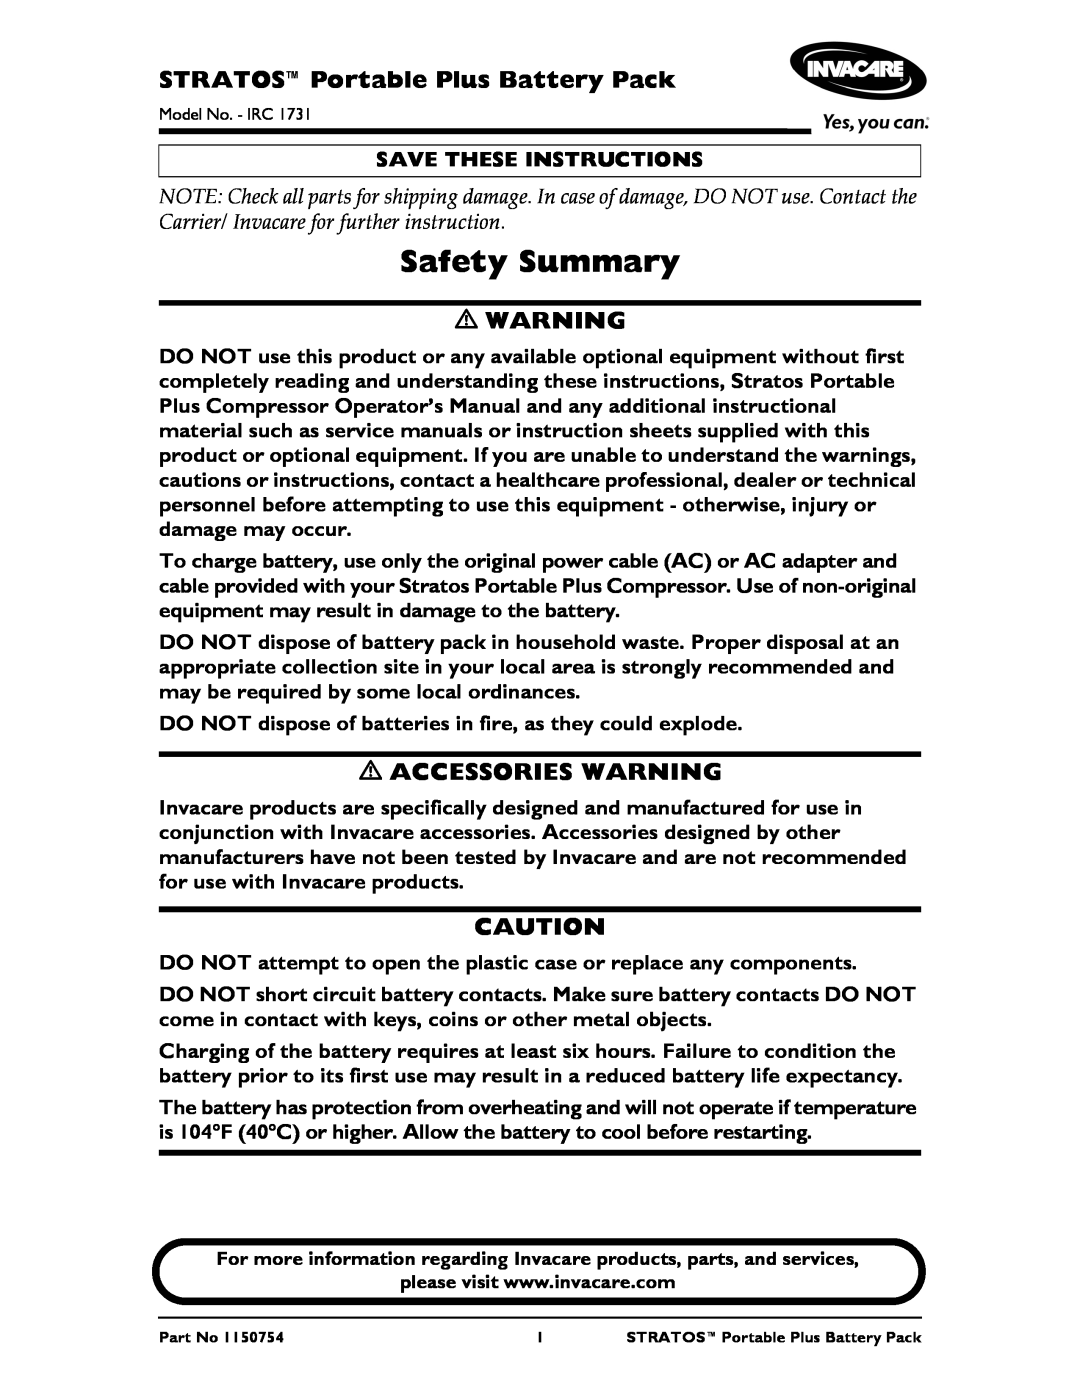 Invacare IRC 1731 service manual Safety Summary, STRATOSPortable Plus Battery Pack, Accessories Warning 